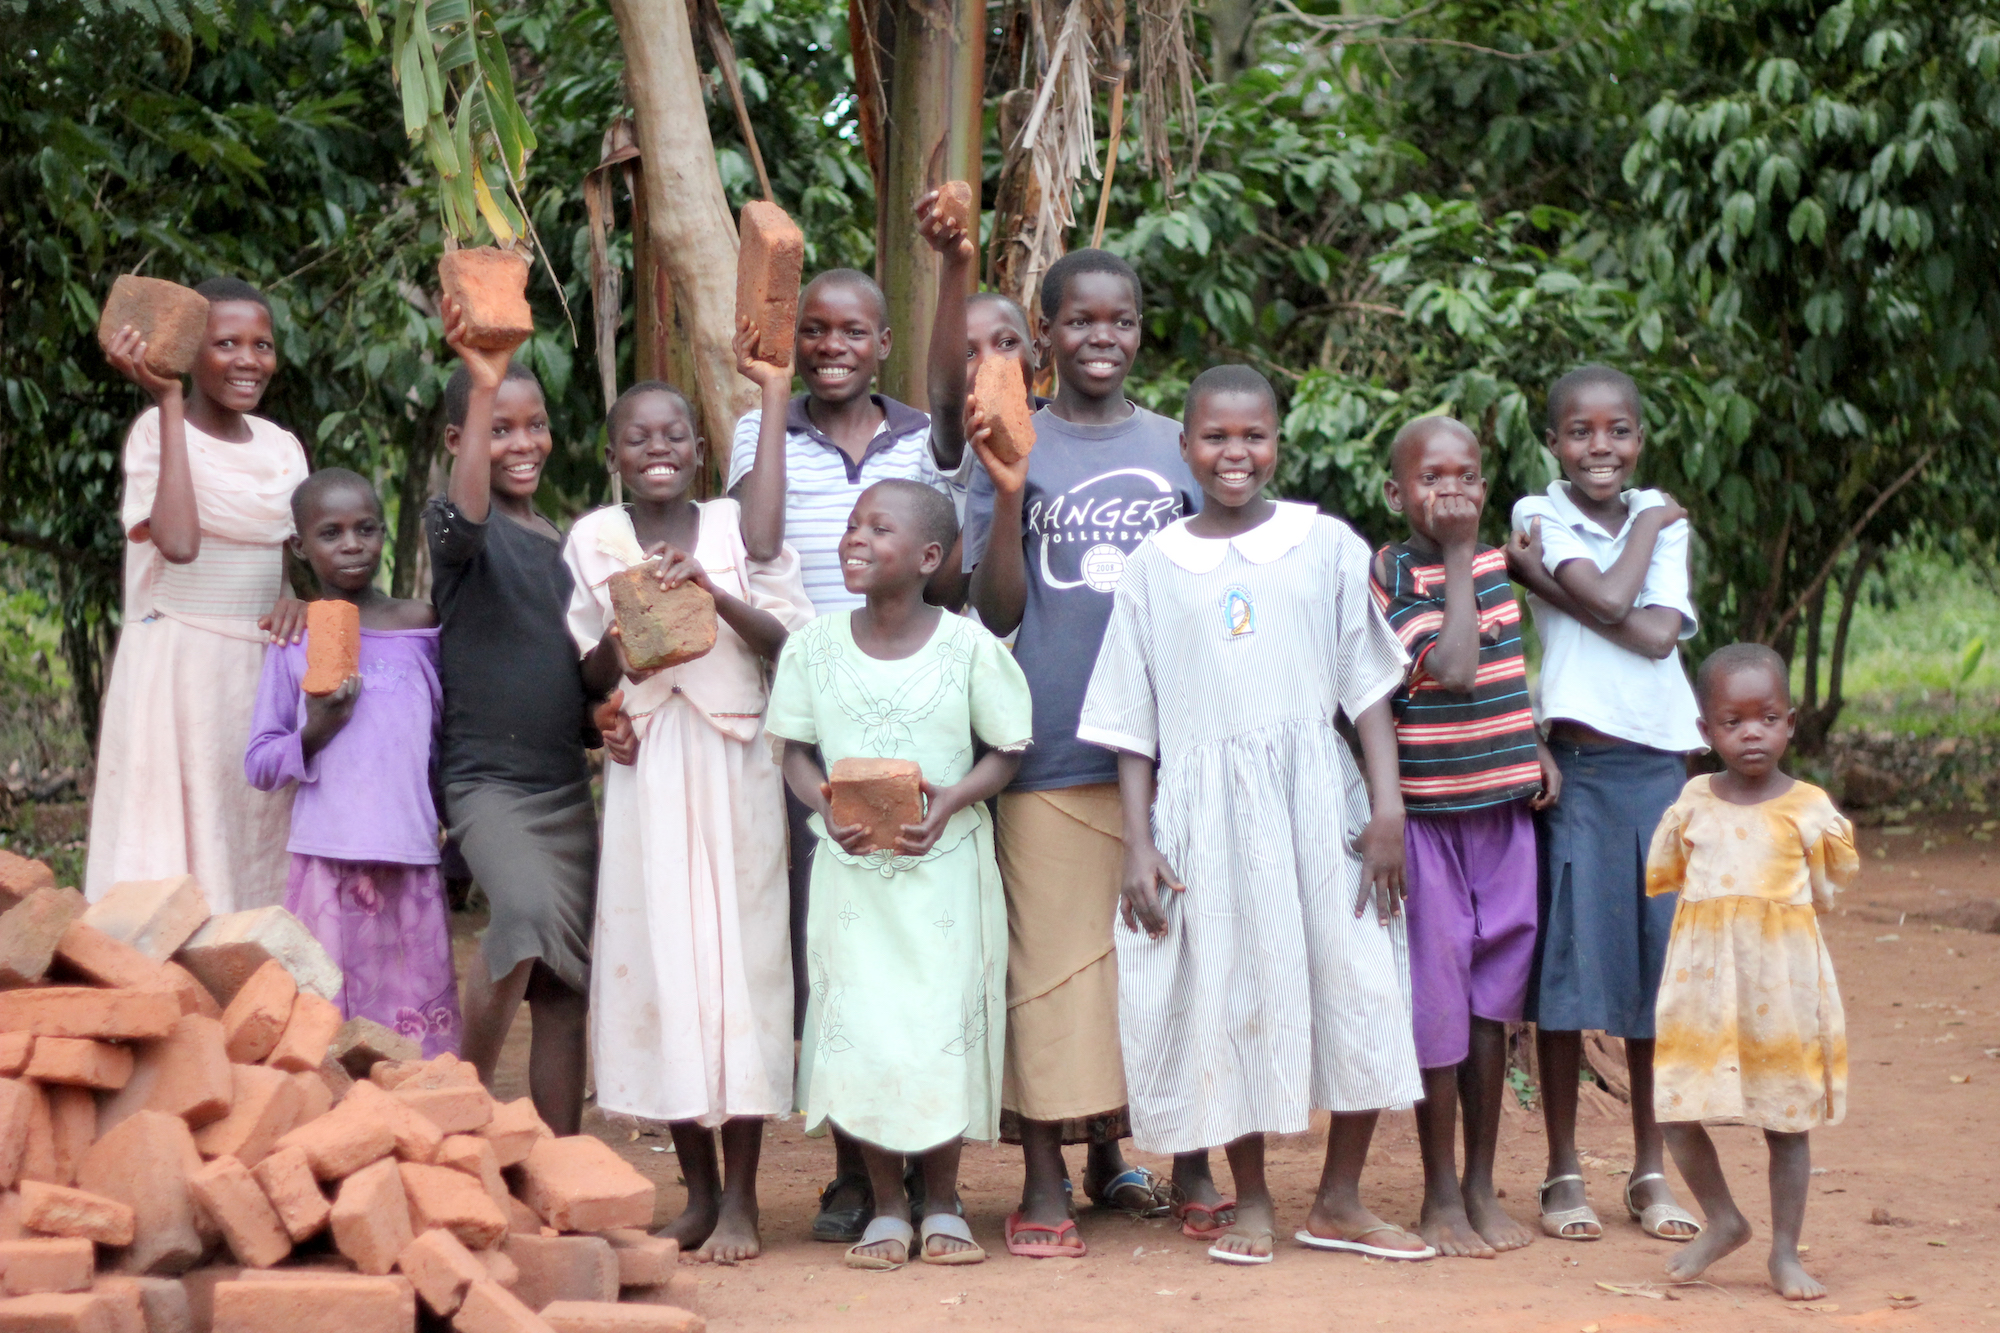 Group shot of smiling young people holding up bricks